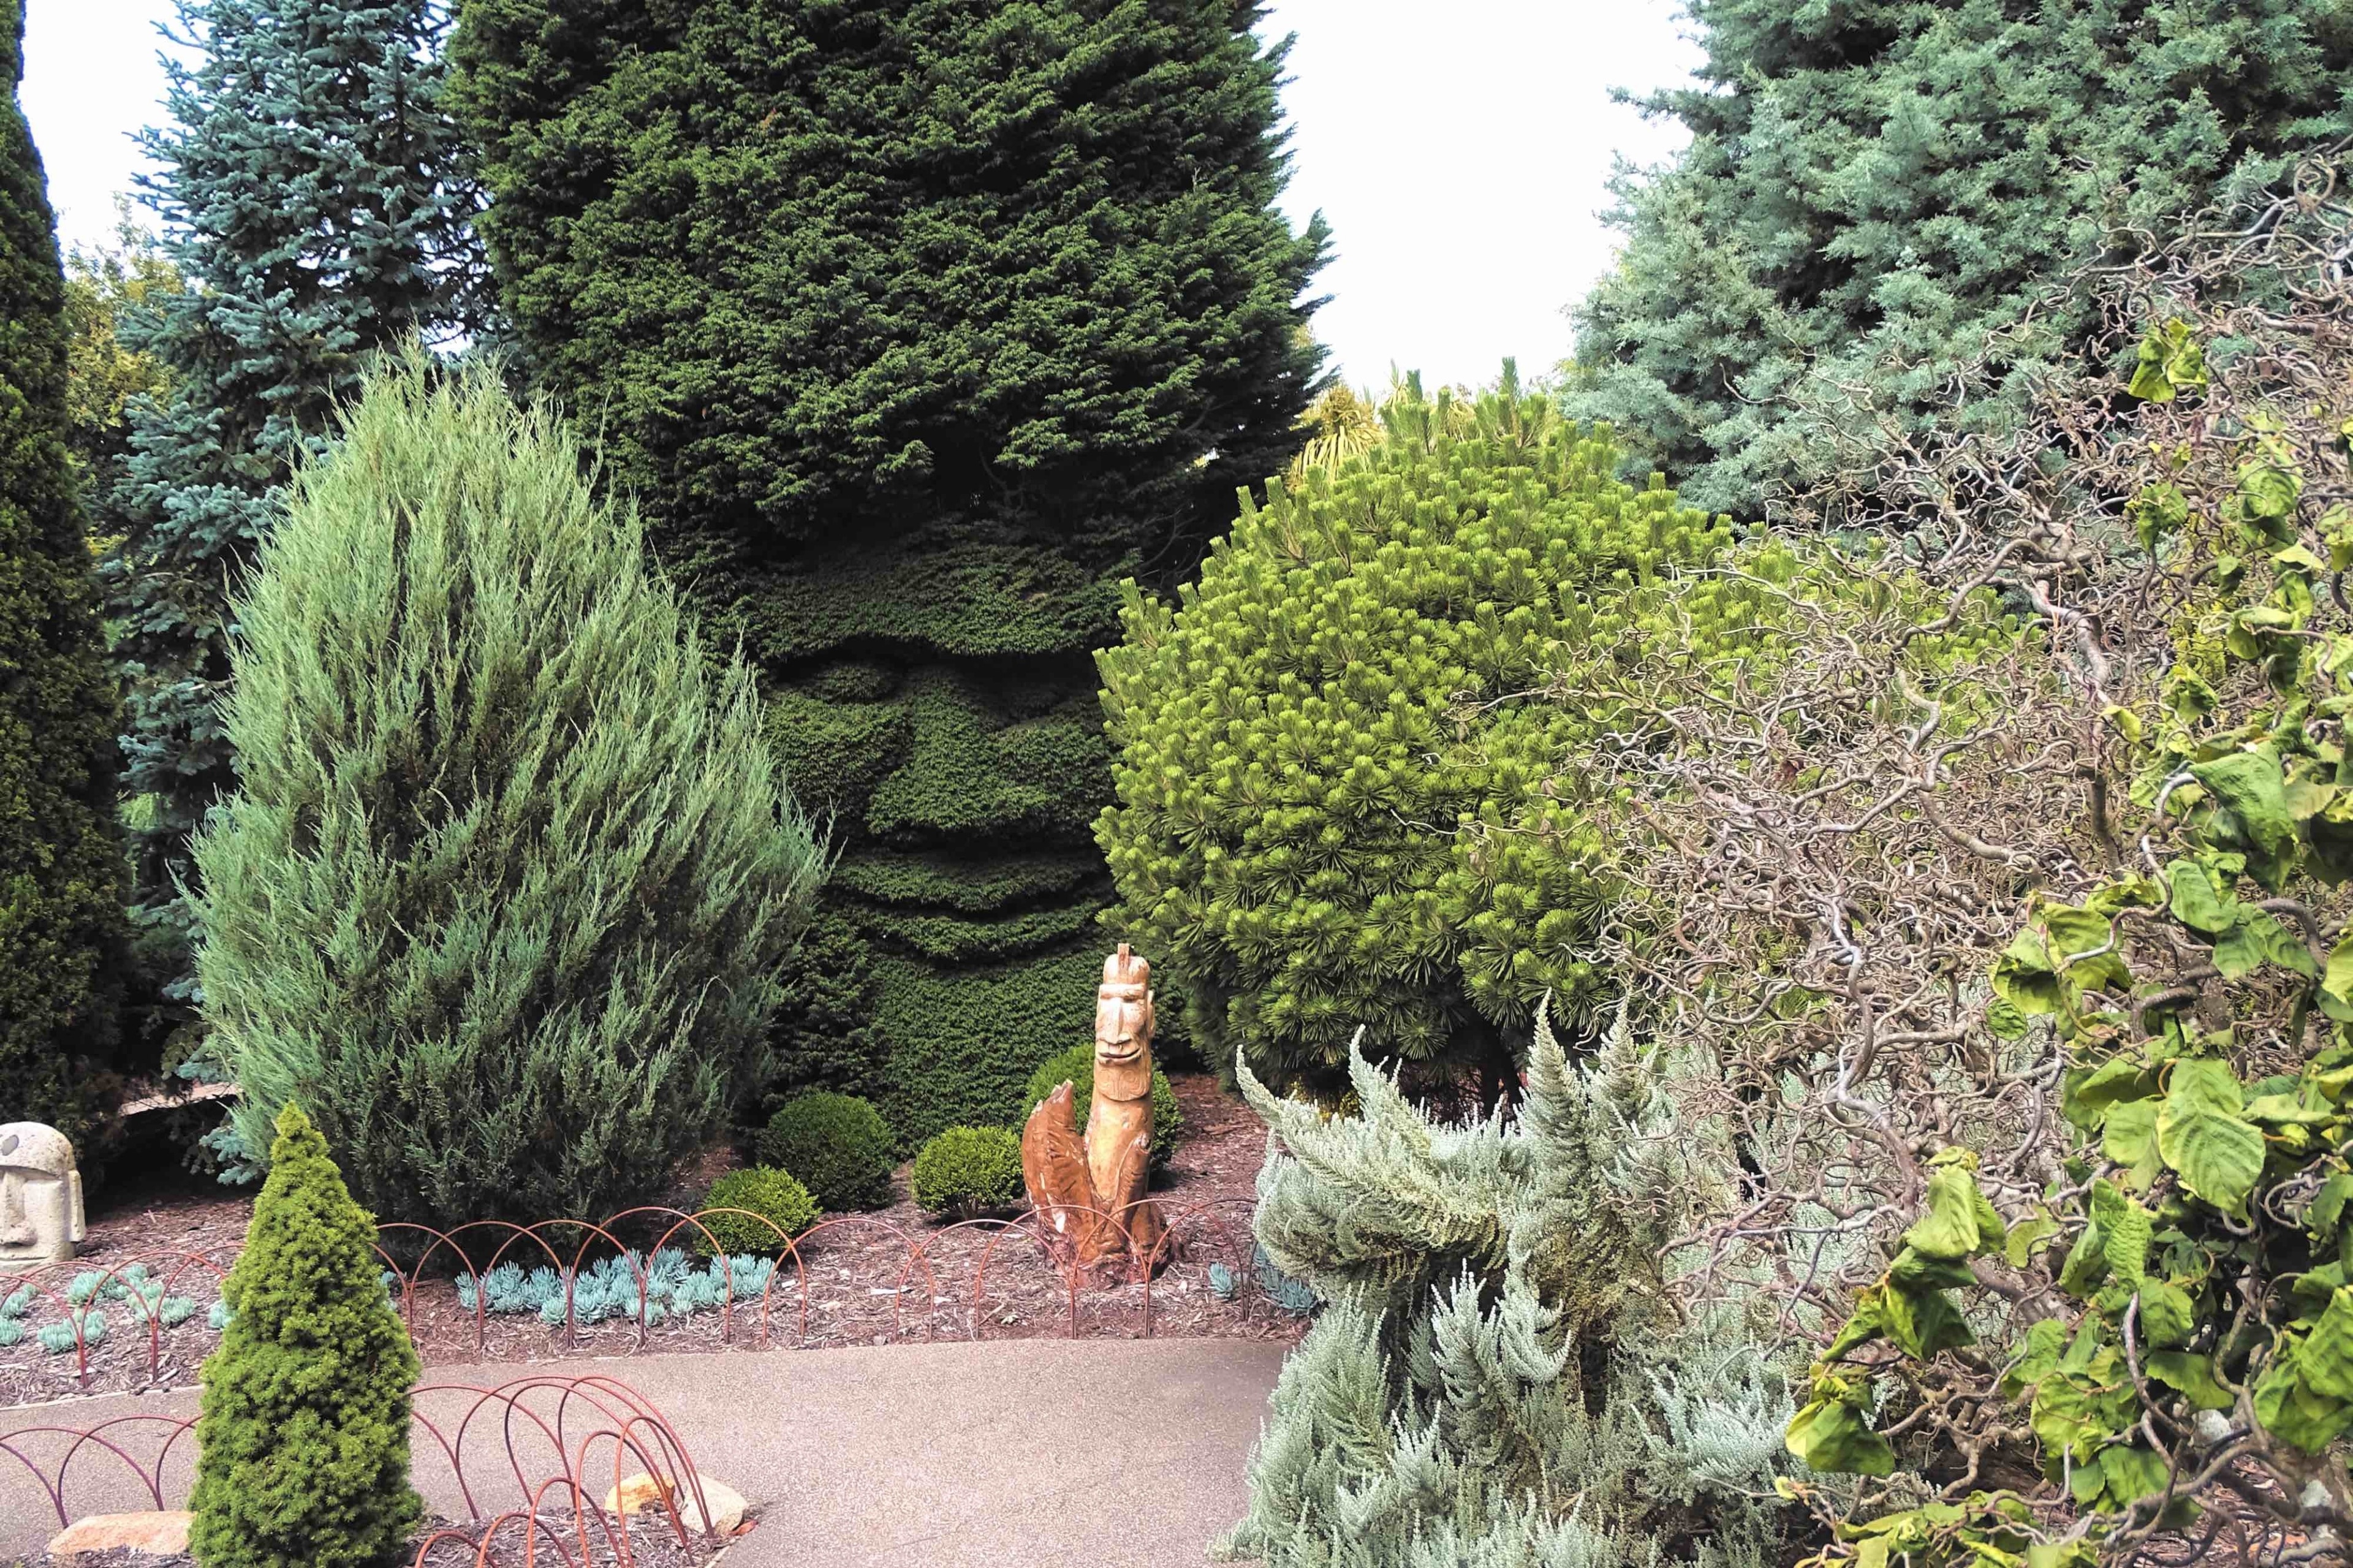 Some great tree sculptures seen throughout the garden and well maintained mazes